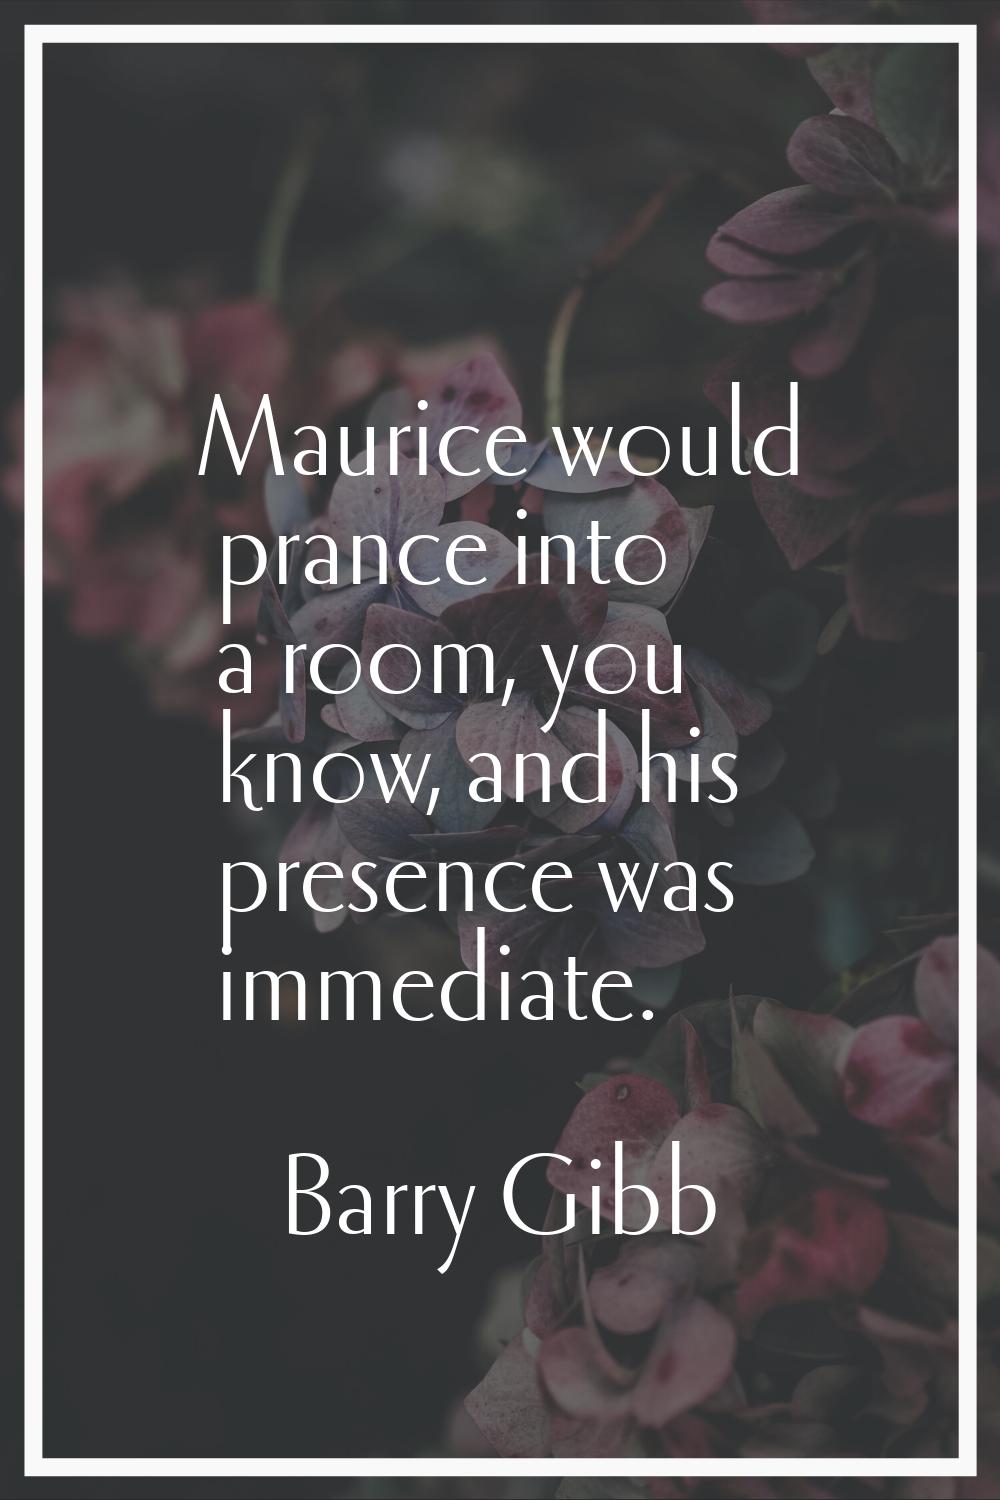 Maurice would prance into a room, you know, and his presence was immediate.